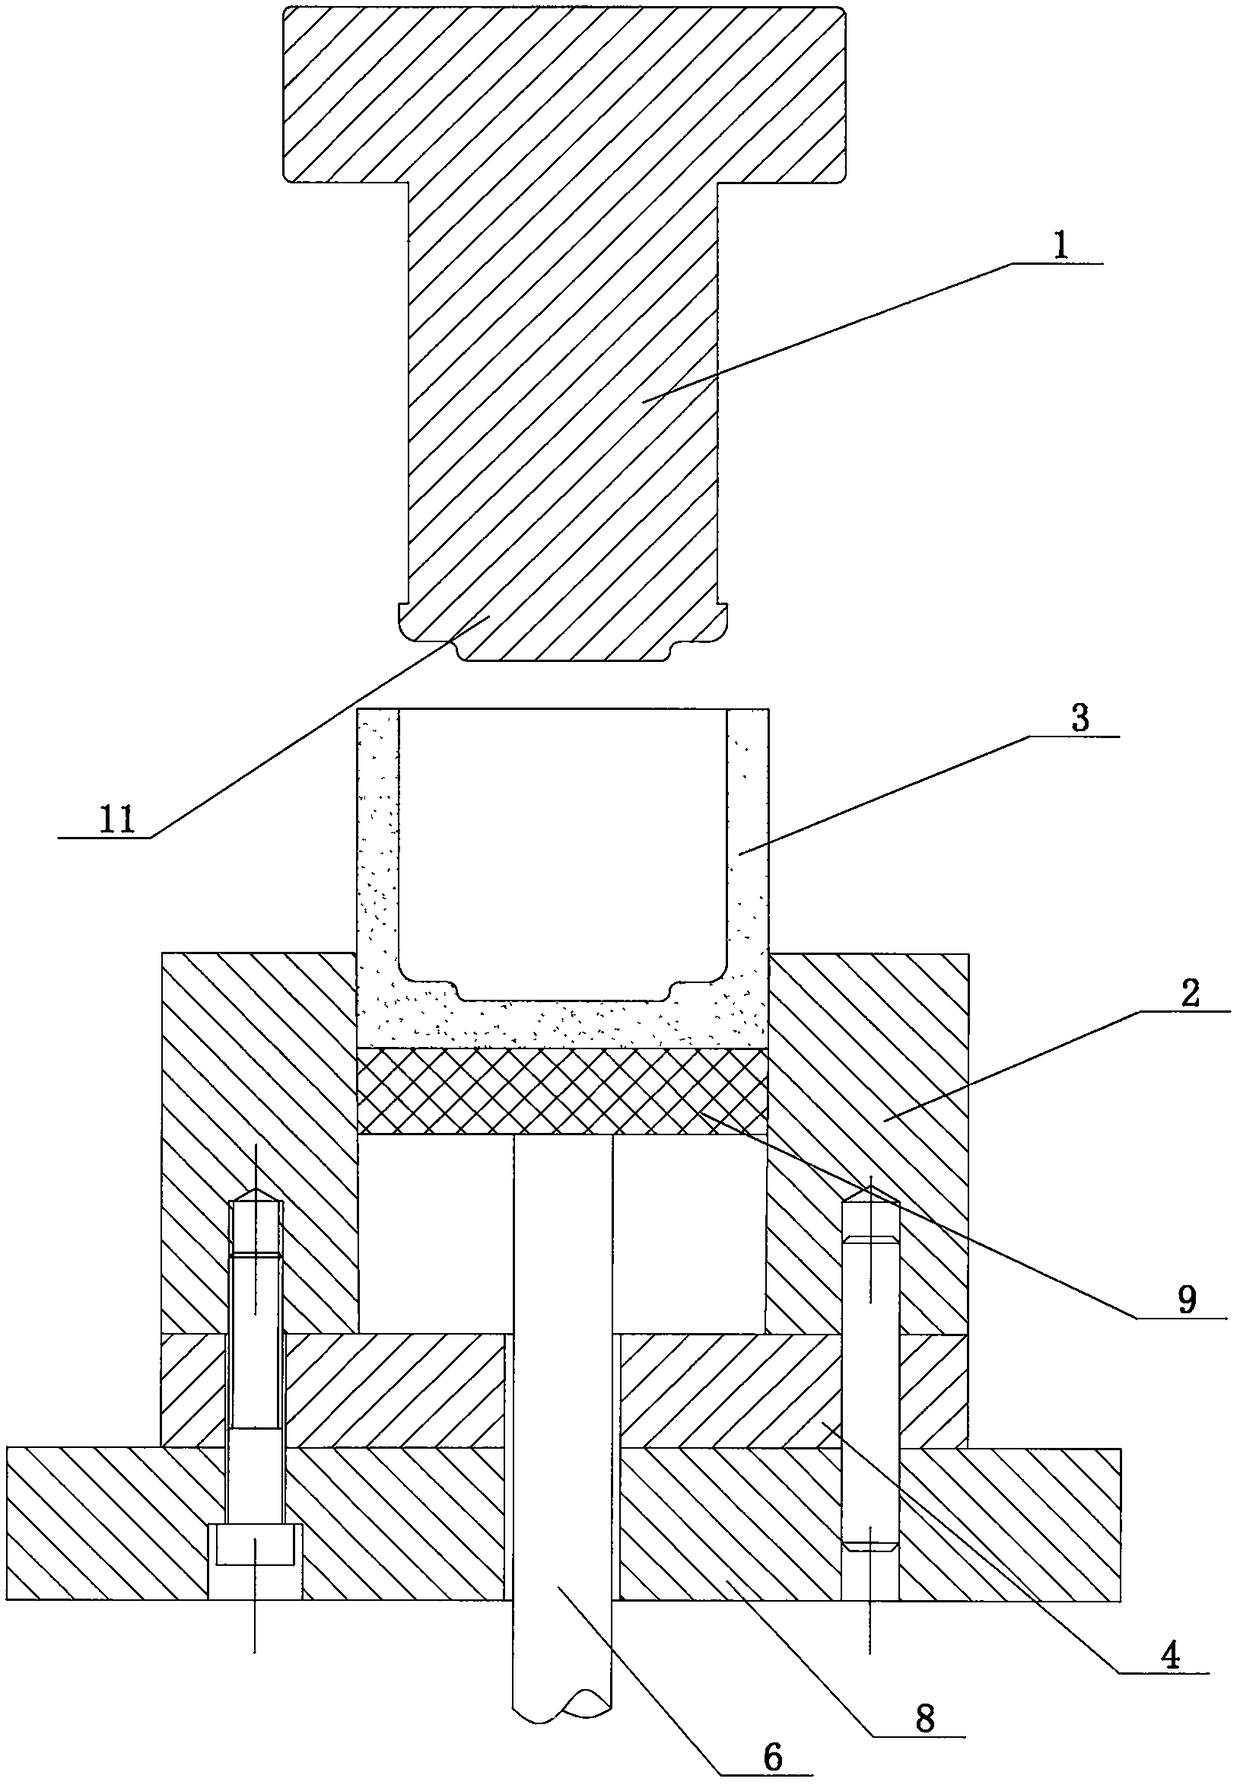 A method for rotary extrusion forming of light alloy cup-shaped parts